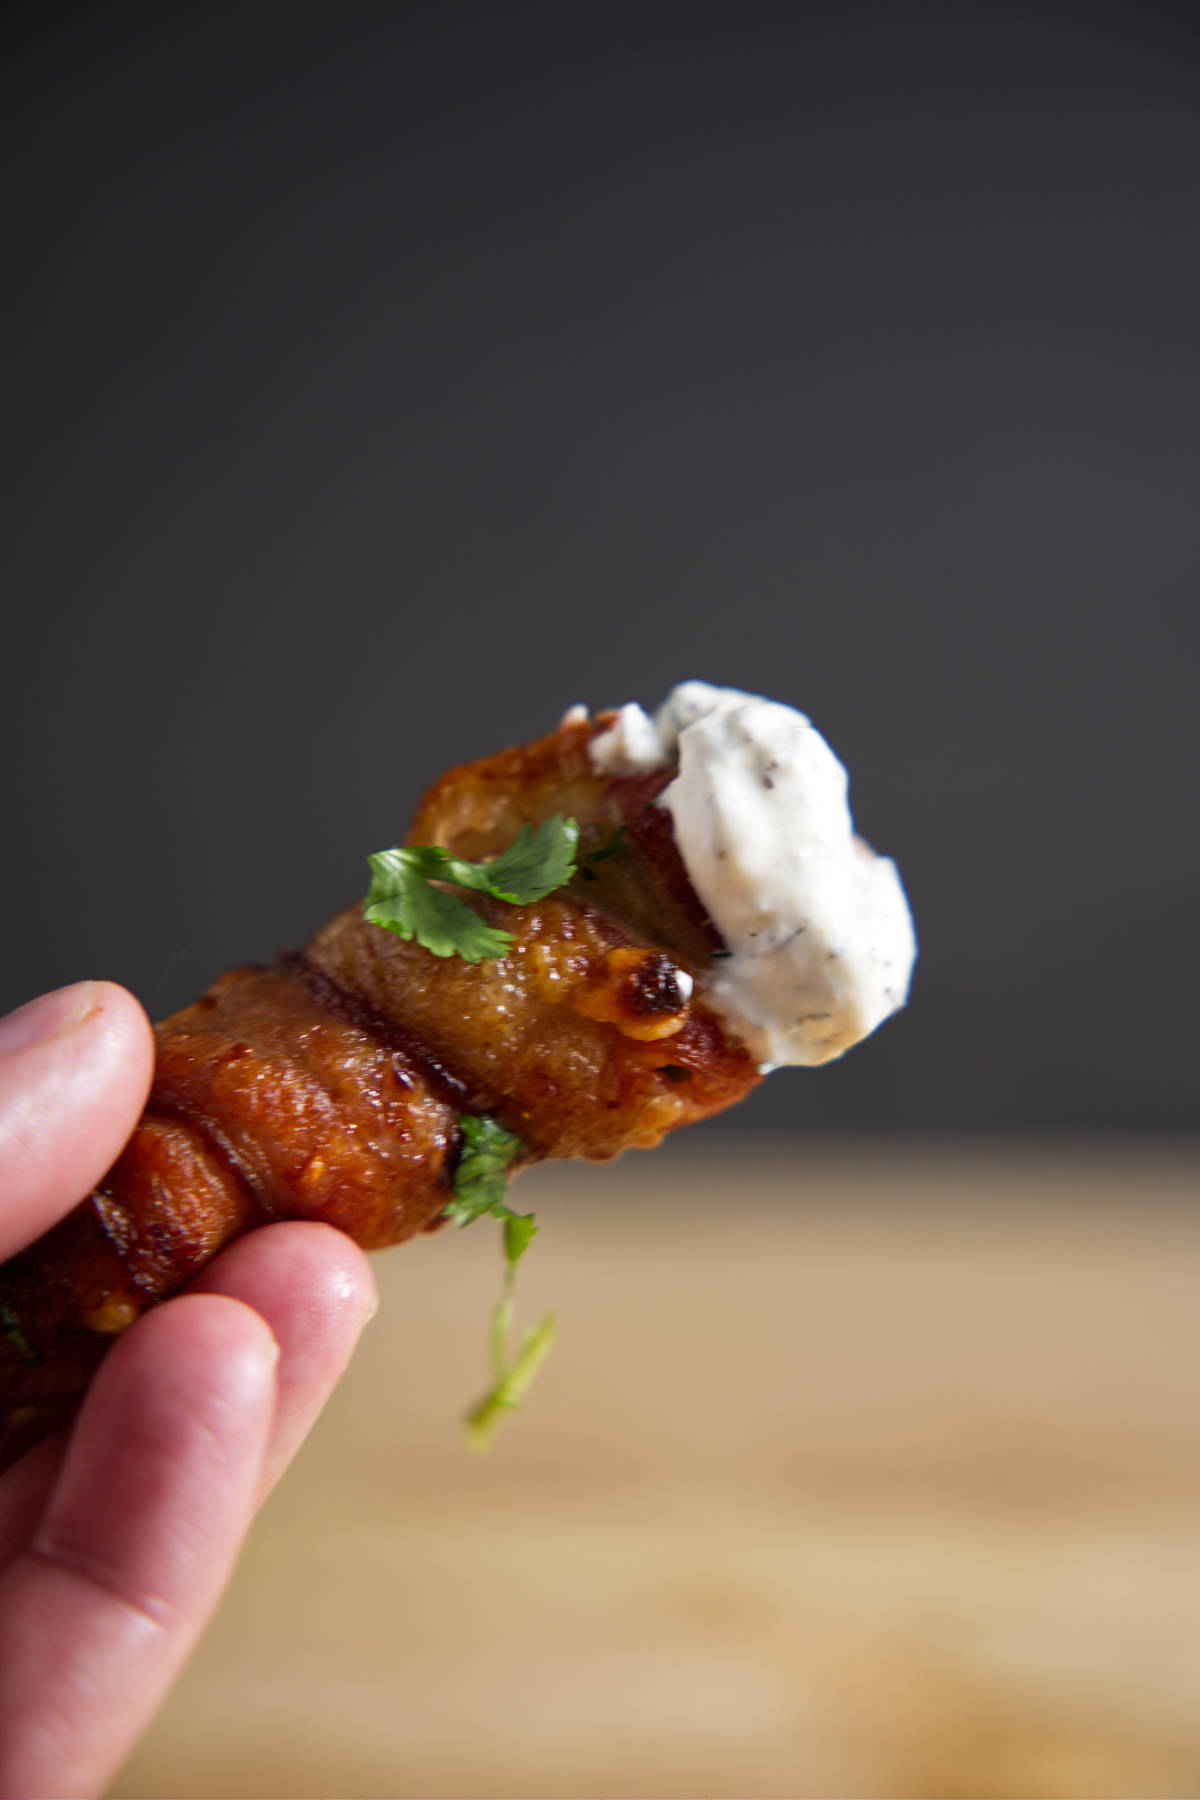 Single bacon wrapped jalapeño popper dipped in blue cheese dressing held in hand.